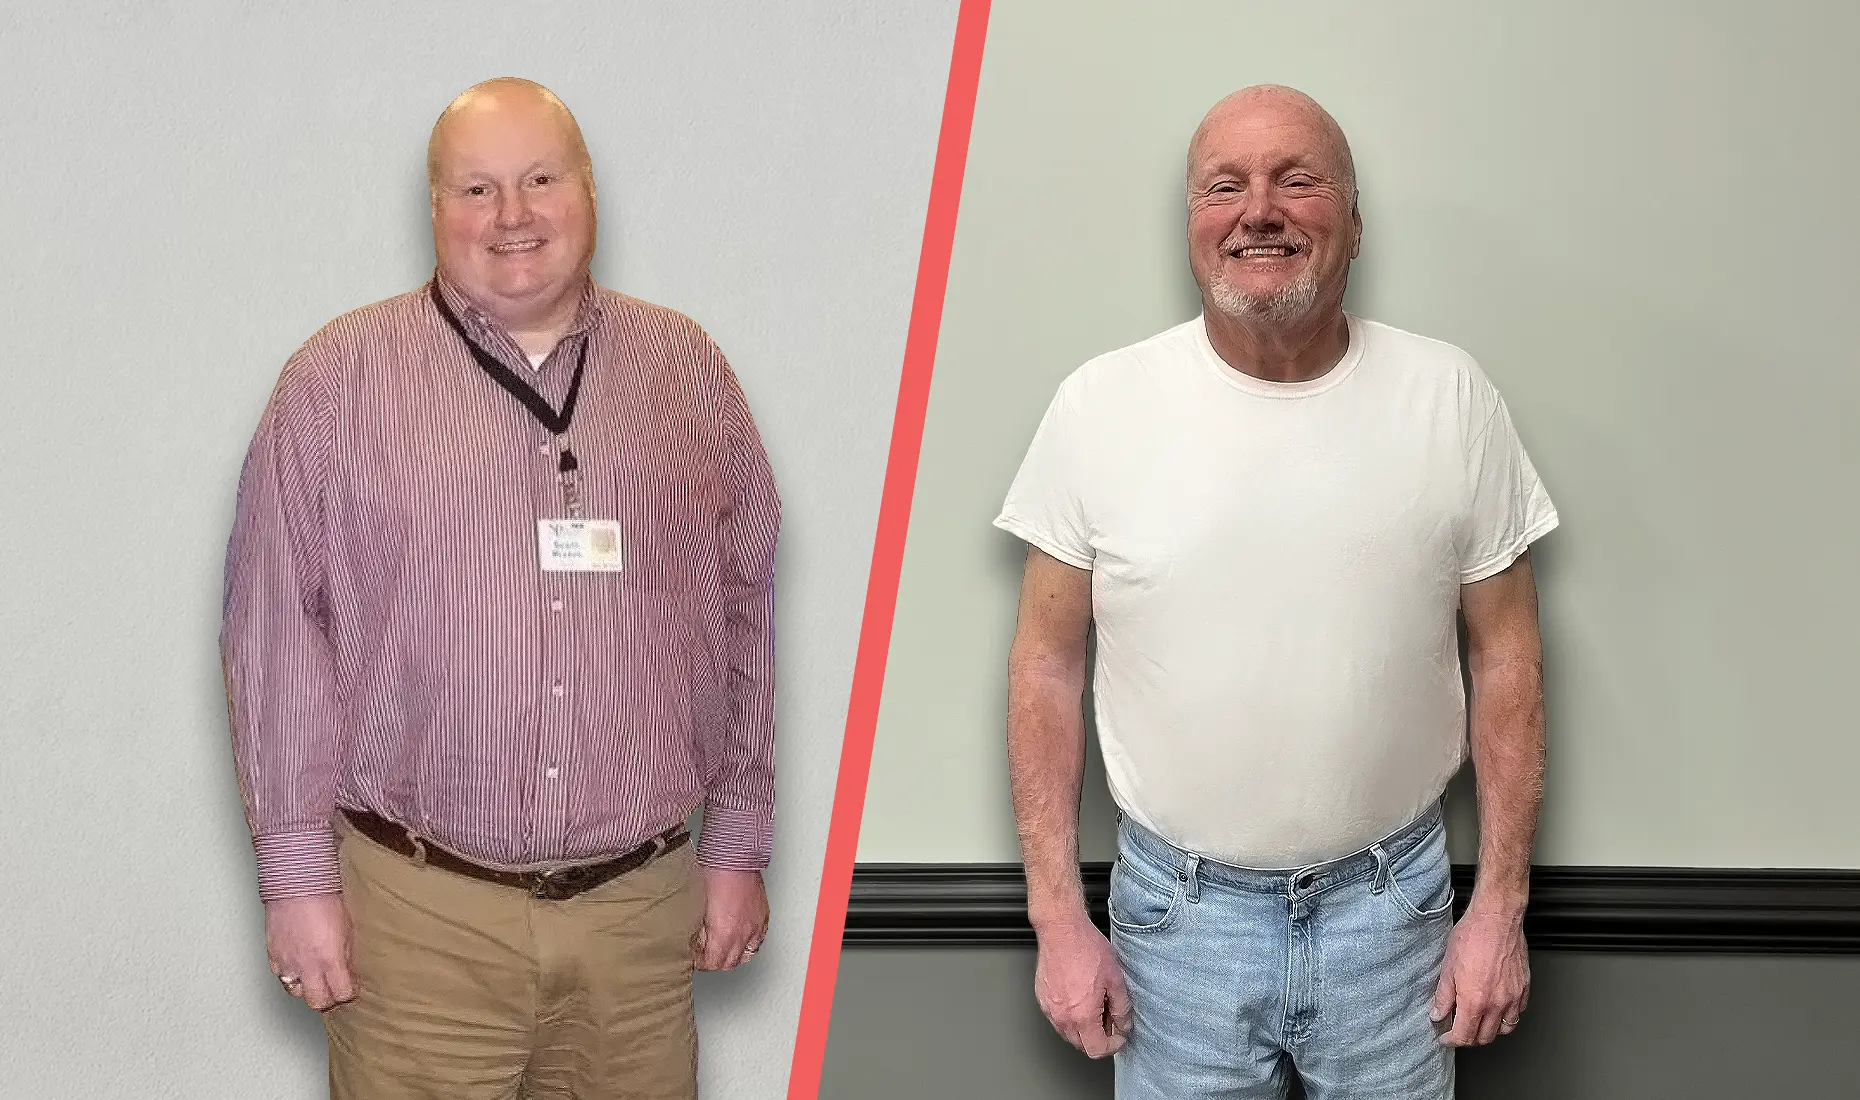 Photo showing weight differences after being on TRT